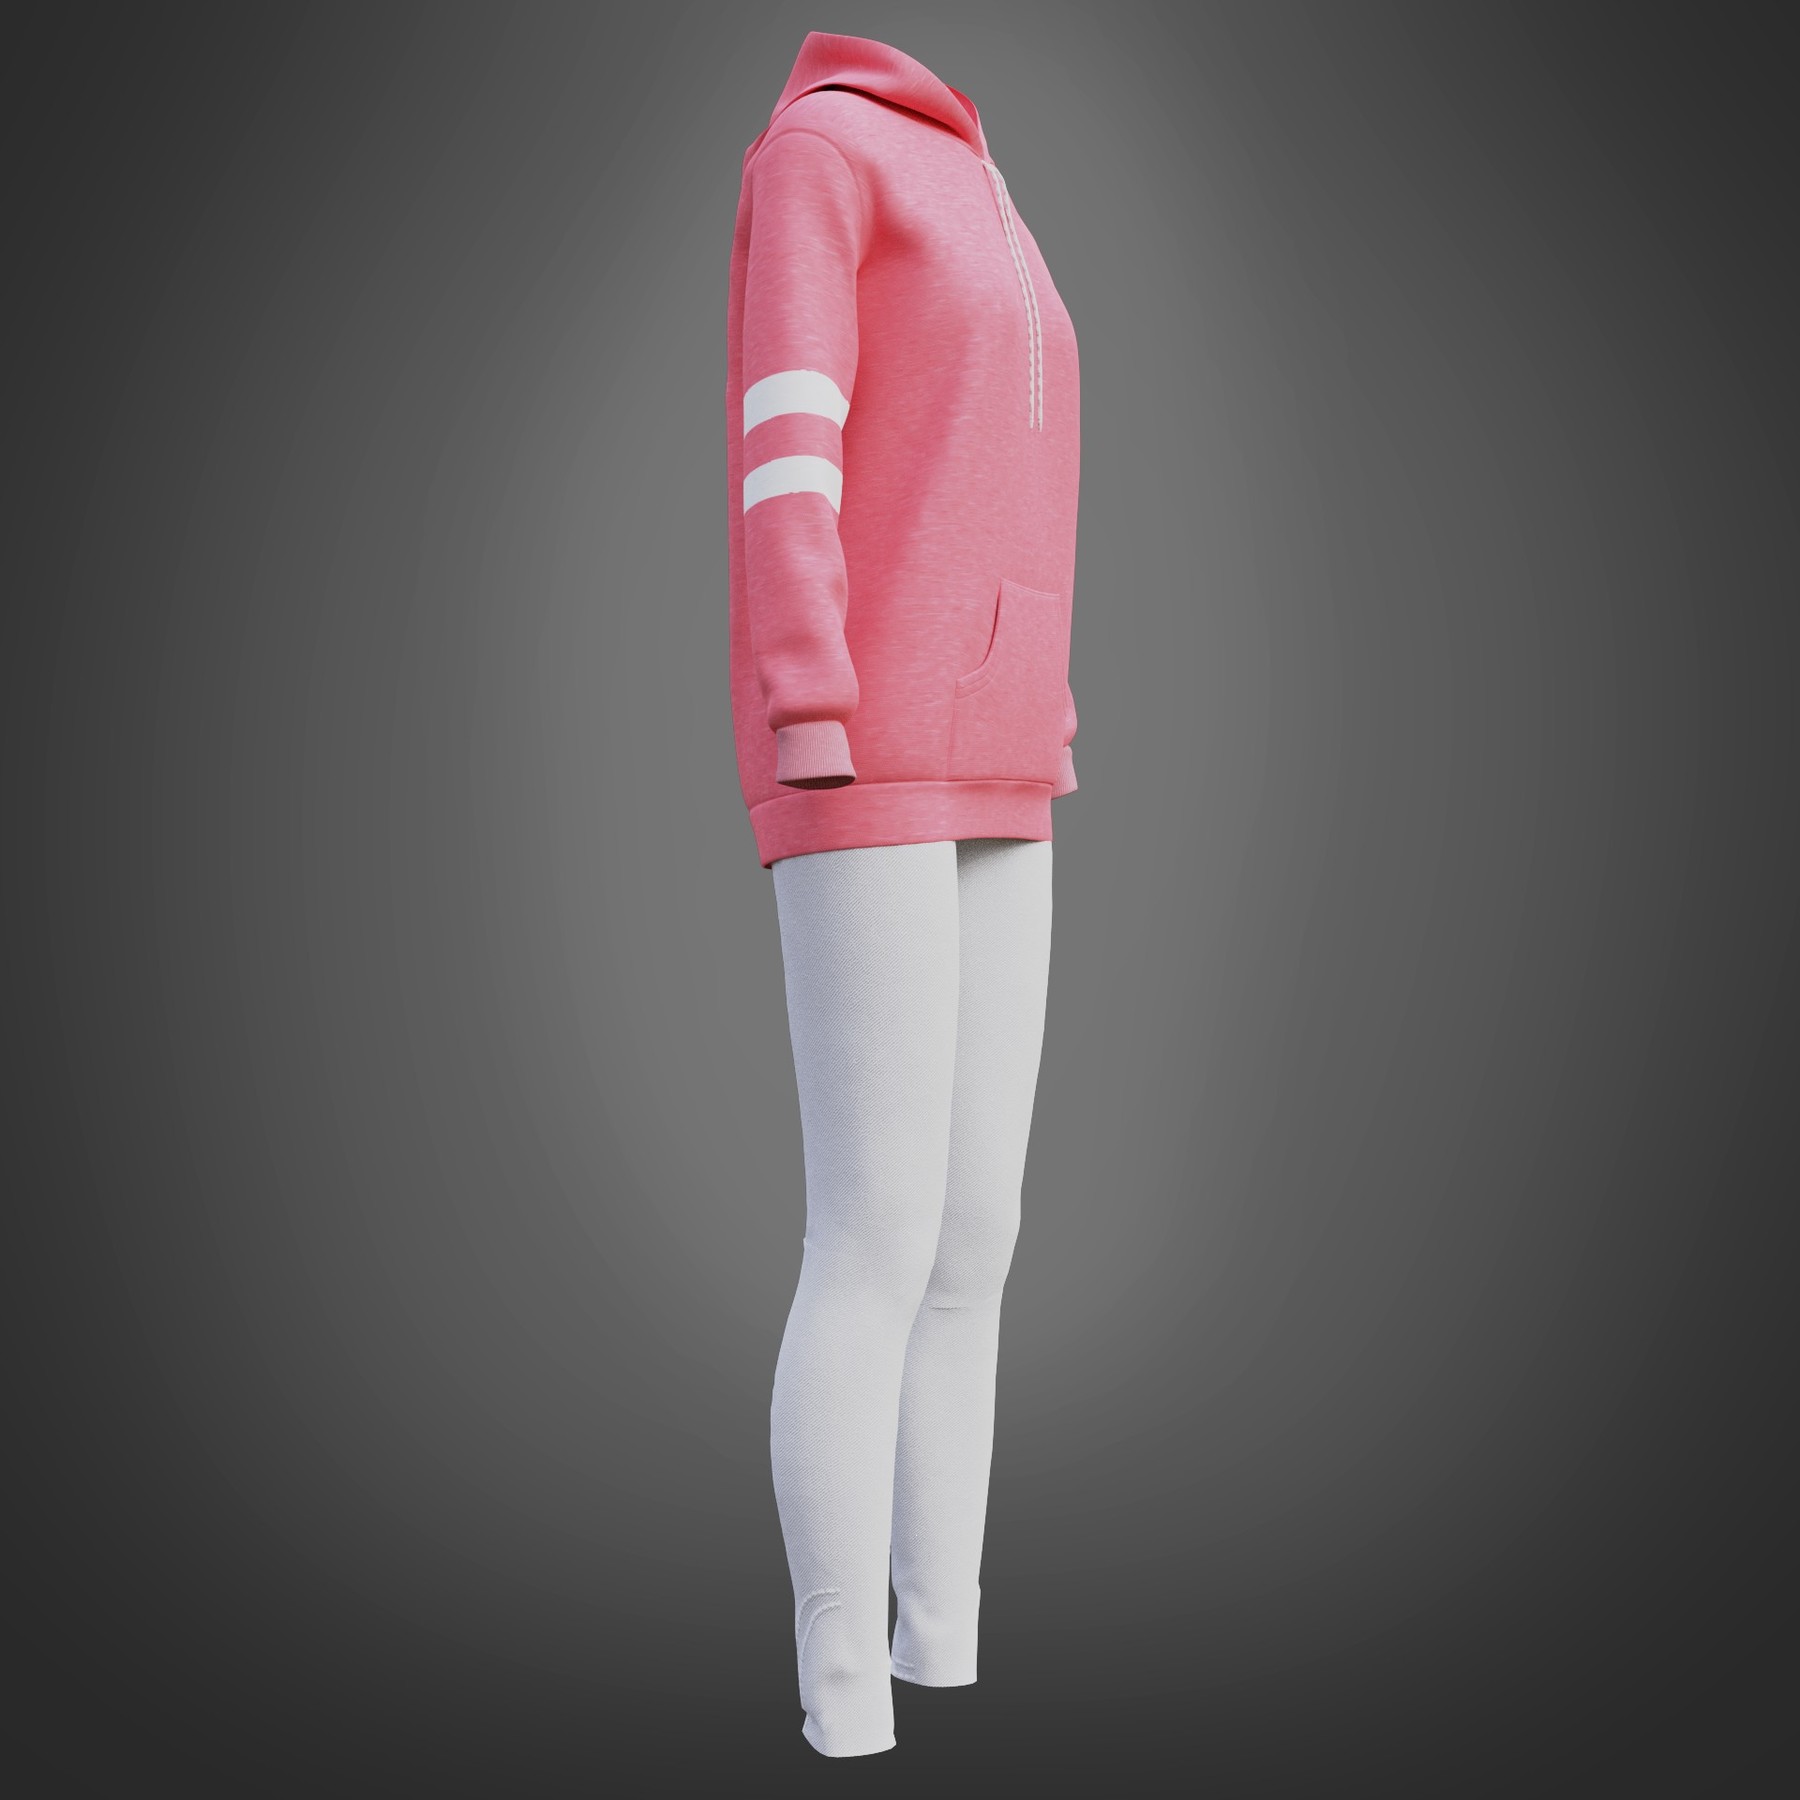 ArtStation - Cute - 3D leggings oversized Assets | Model pink and Game hoodie outfit